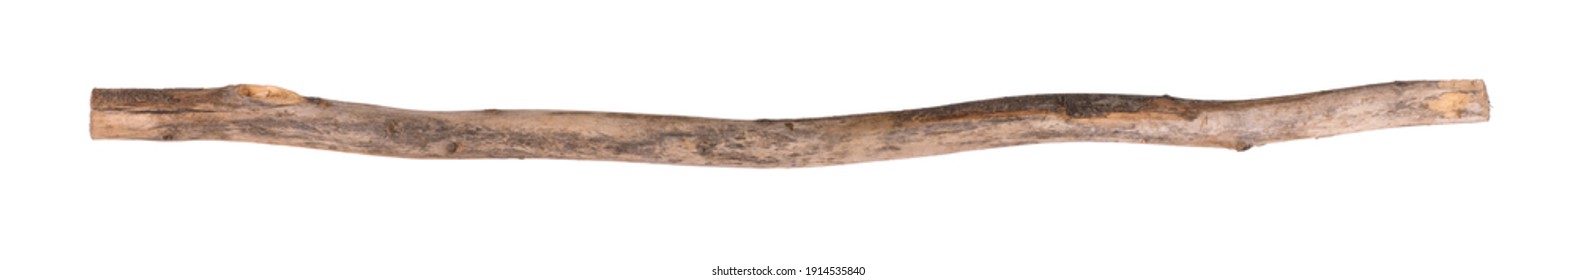 broomstick,dirty wooden stick isolated on white background